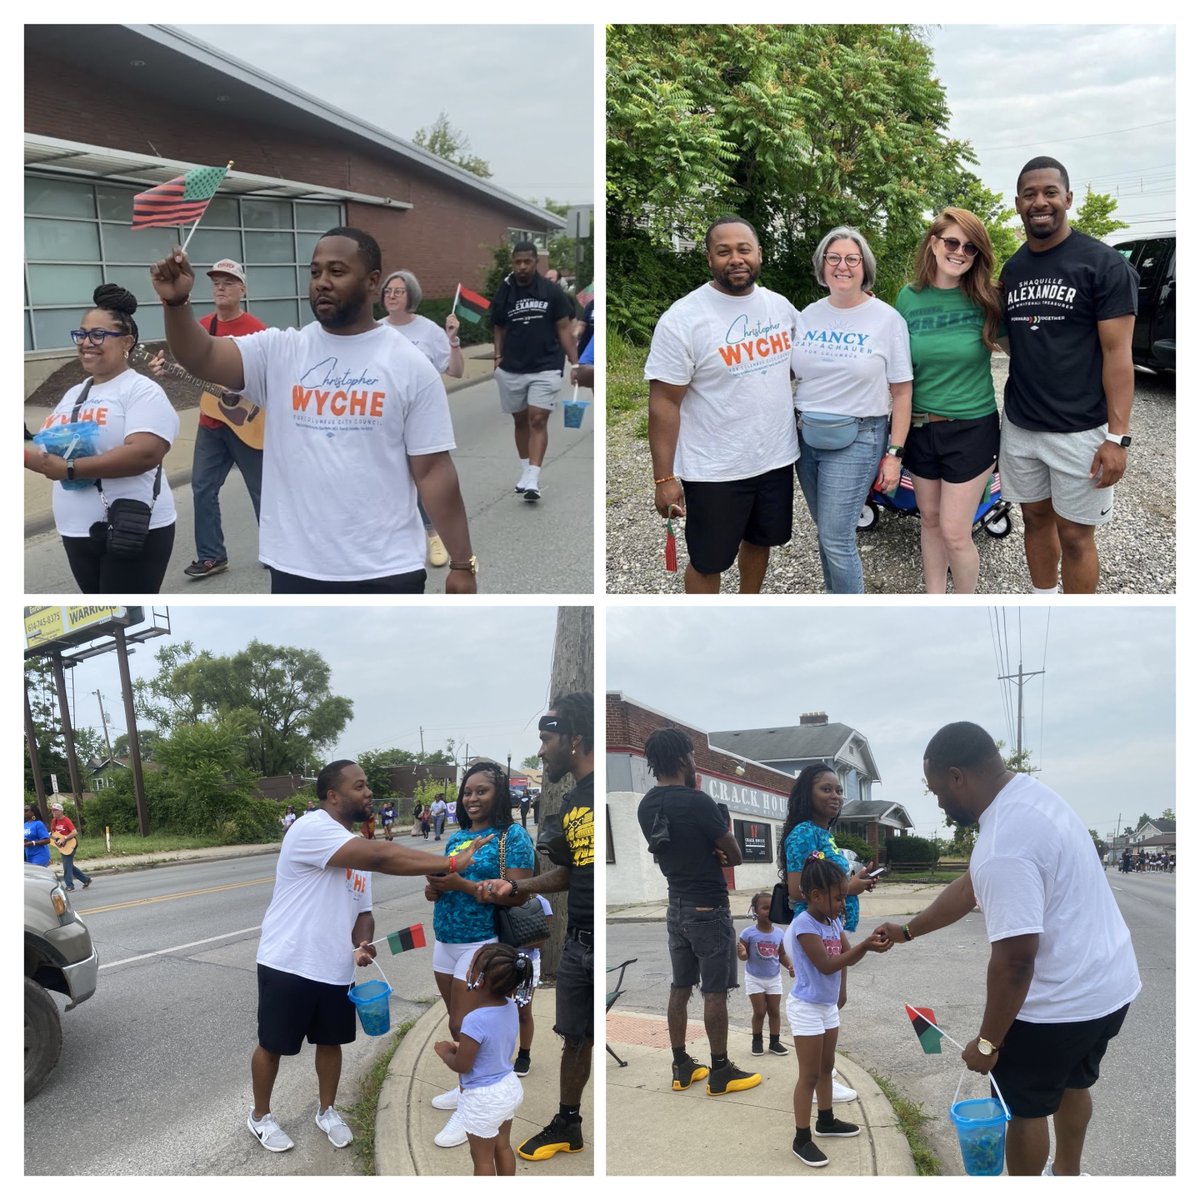 The inaugural Linden Juneteenth Parade. Happy Juneteenth! #wycheforcolumbus #WeAreLinden #Juneteenth #wycheforcolumbuscitycouncil #crowndistrict